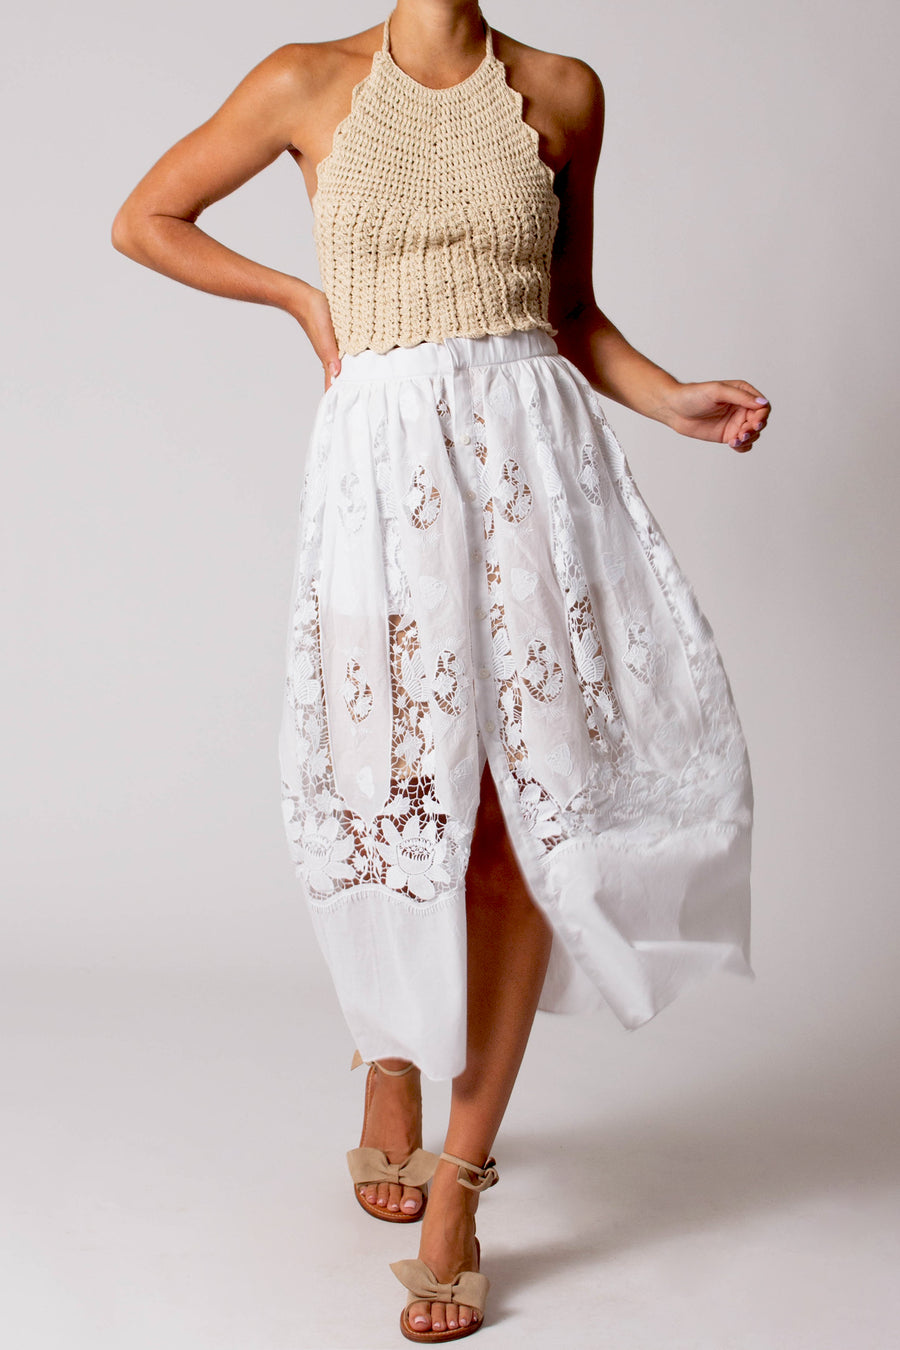 This photo is of a woman wearing a long, white, button down skirt. The skirt has lace detailing and flows as she walks.